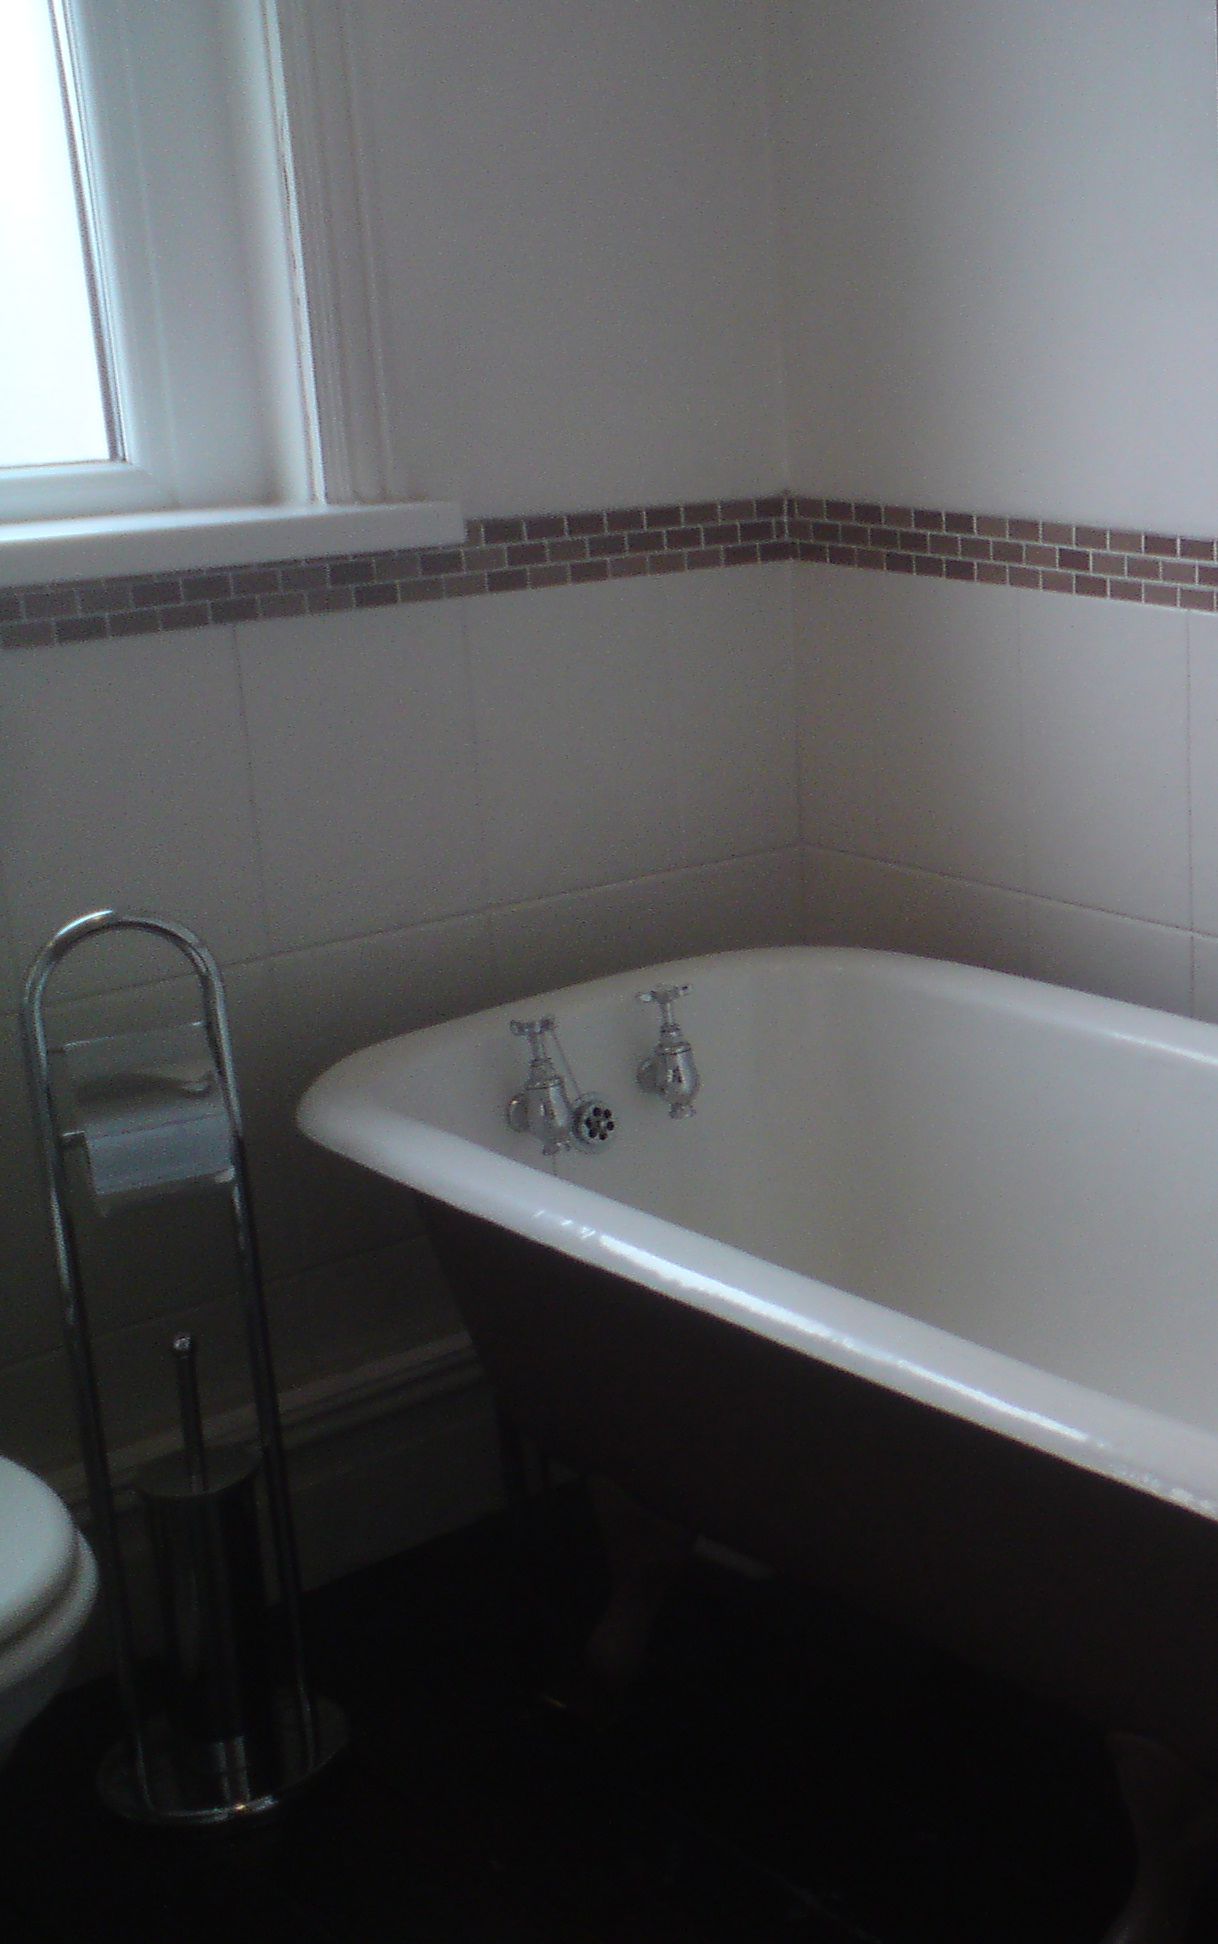 The old bath with grey tiles and a bare wall above.